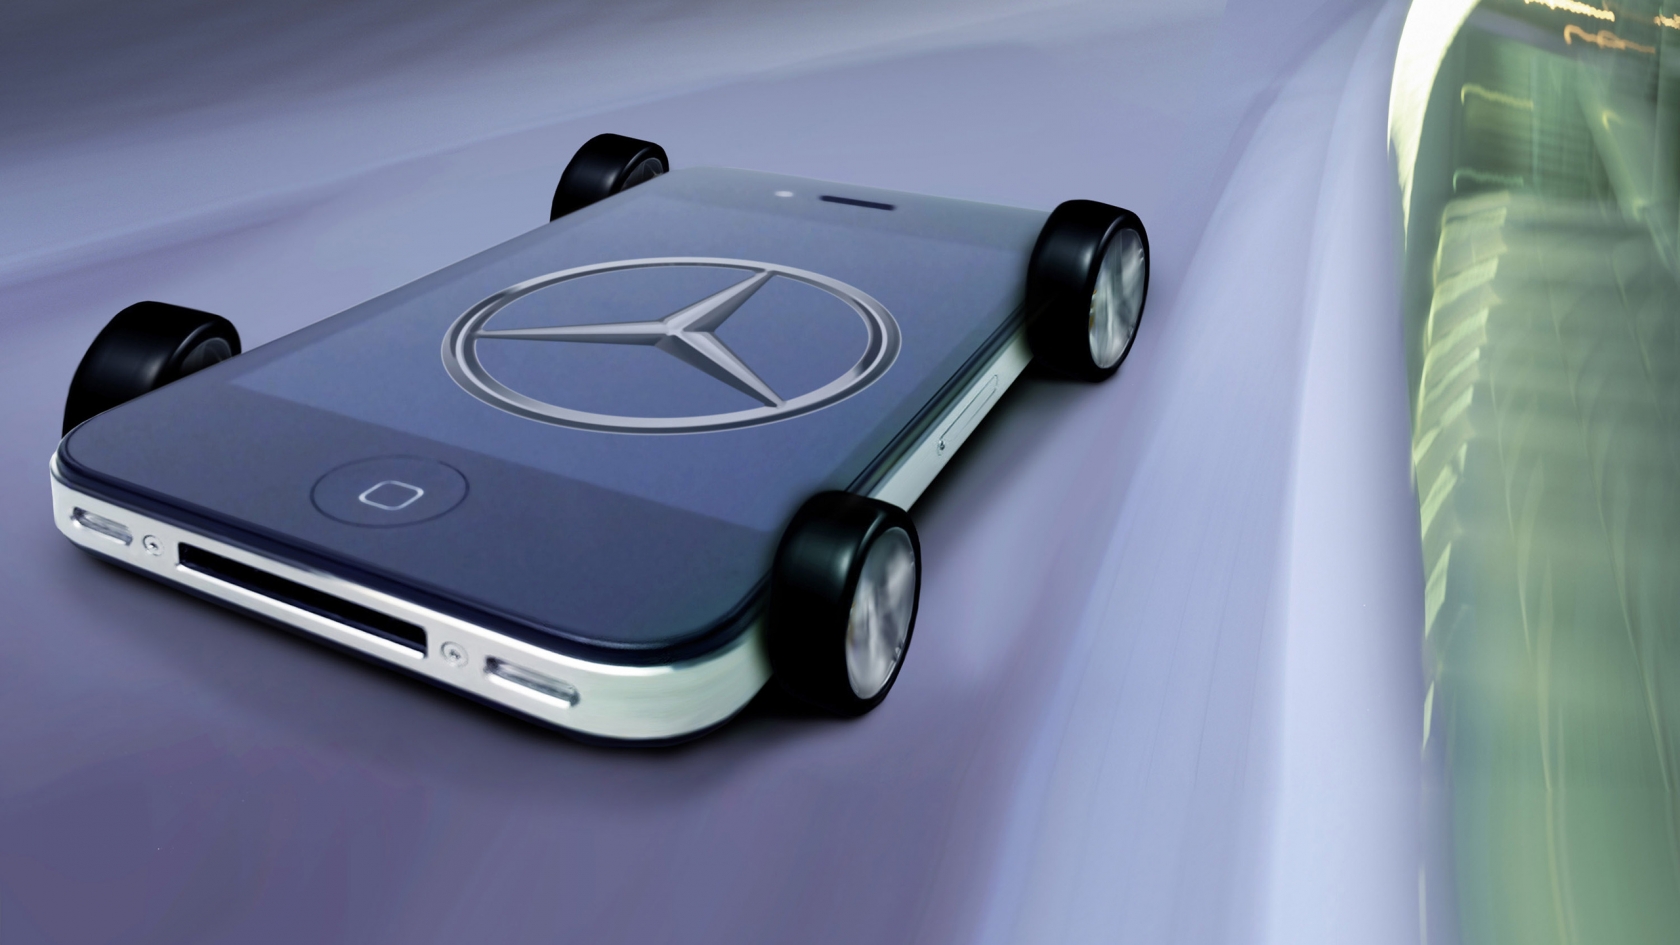 Mercedes Benz iPhone for 1680 x 945 HDTV resolution